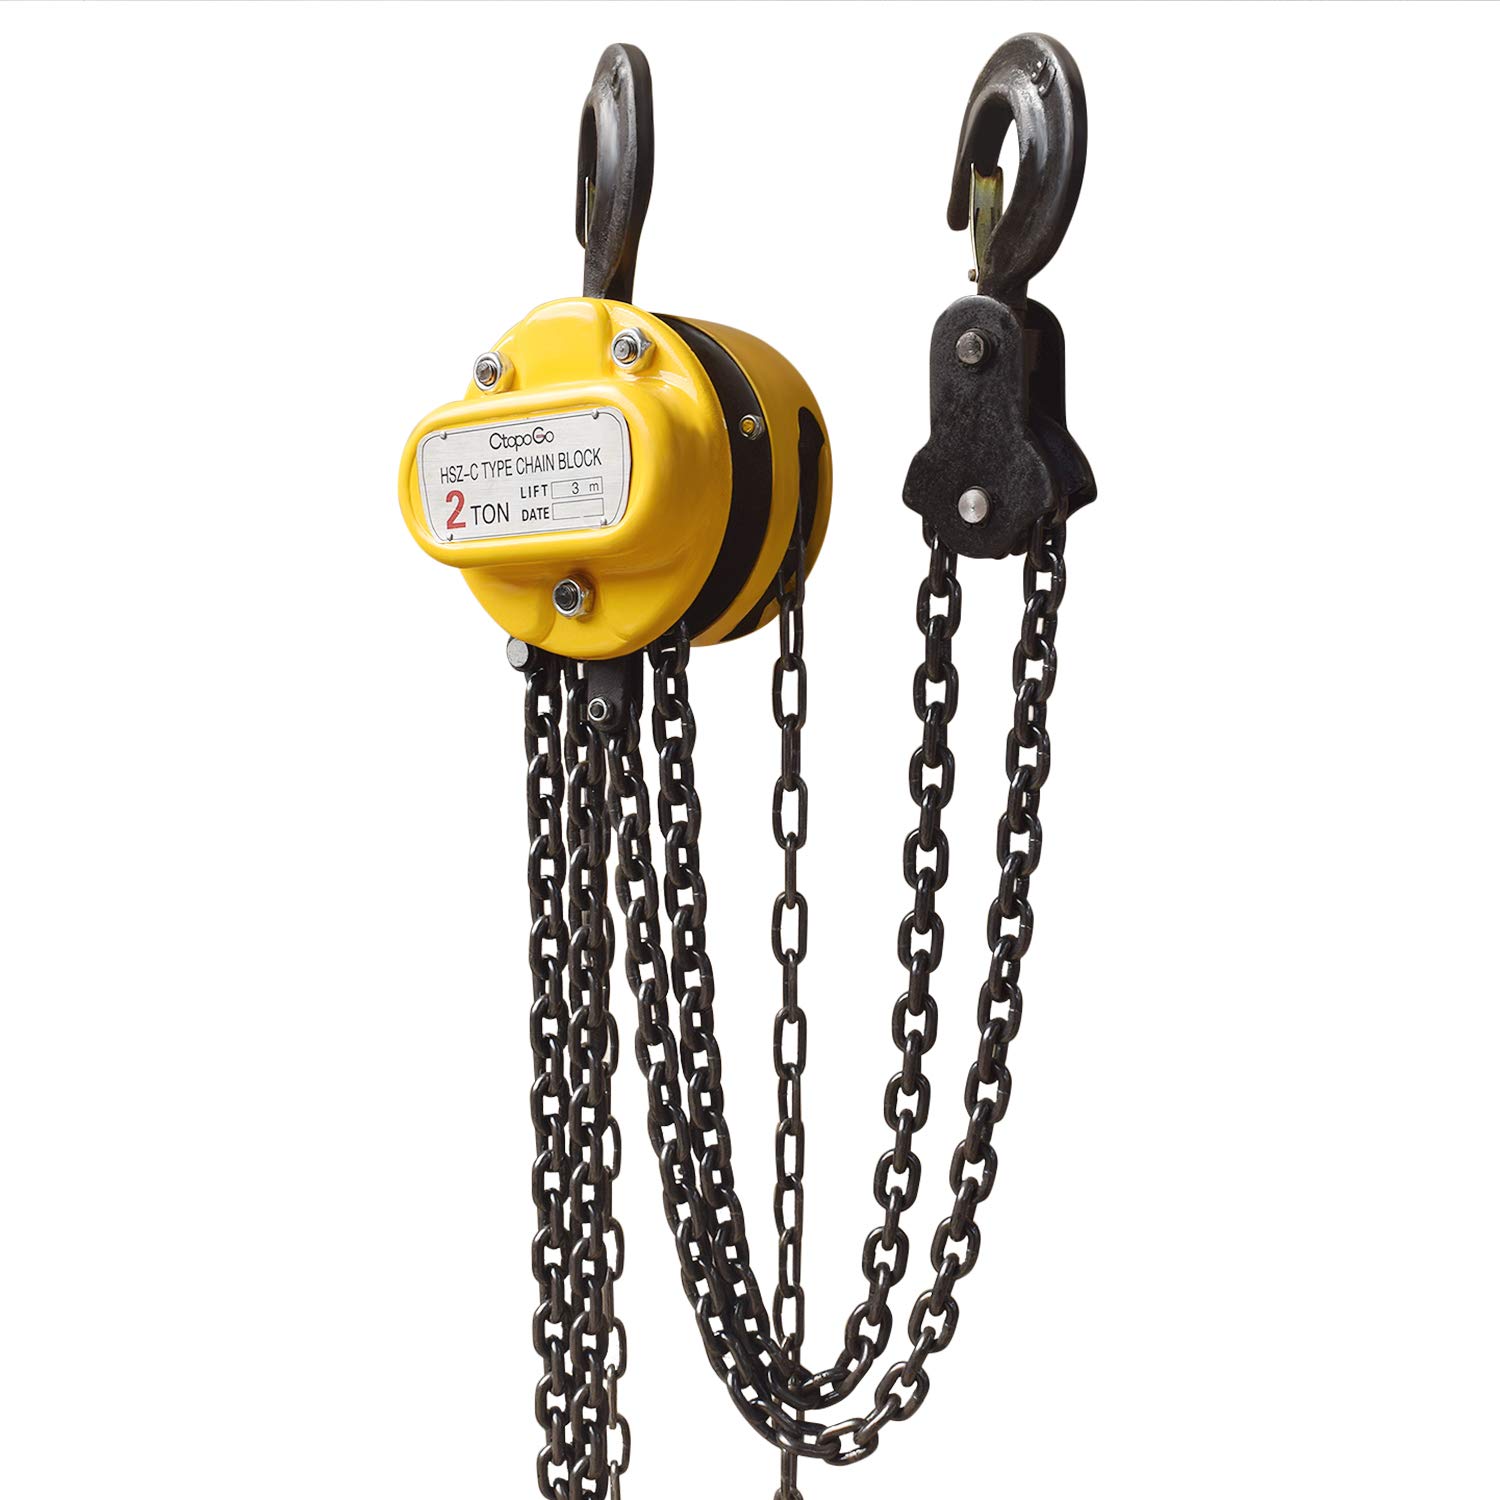 Heavy Duty Alloy Steel 1 Ton 2200Lbs Capacity Manual Hand Engine Lever Block Chain Hoist Pulley Tackle Hoist Winch Lift W/Hook 10FT Lift Red 1 Ton